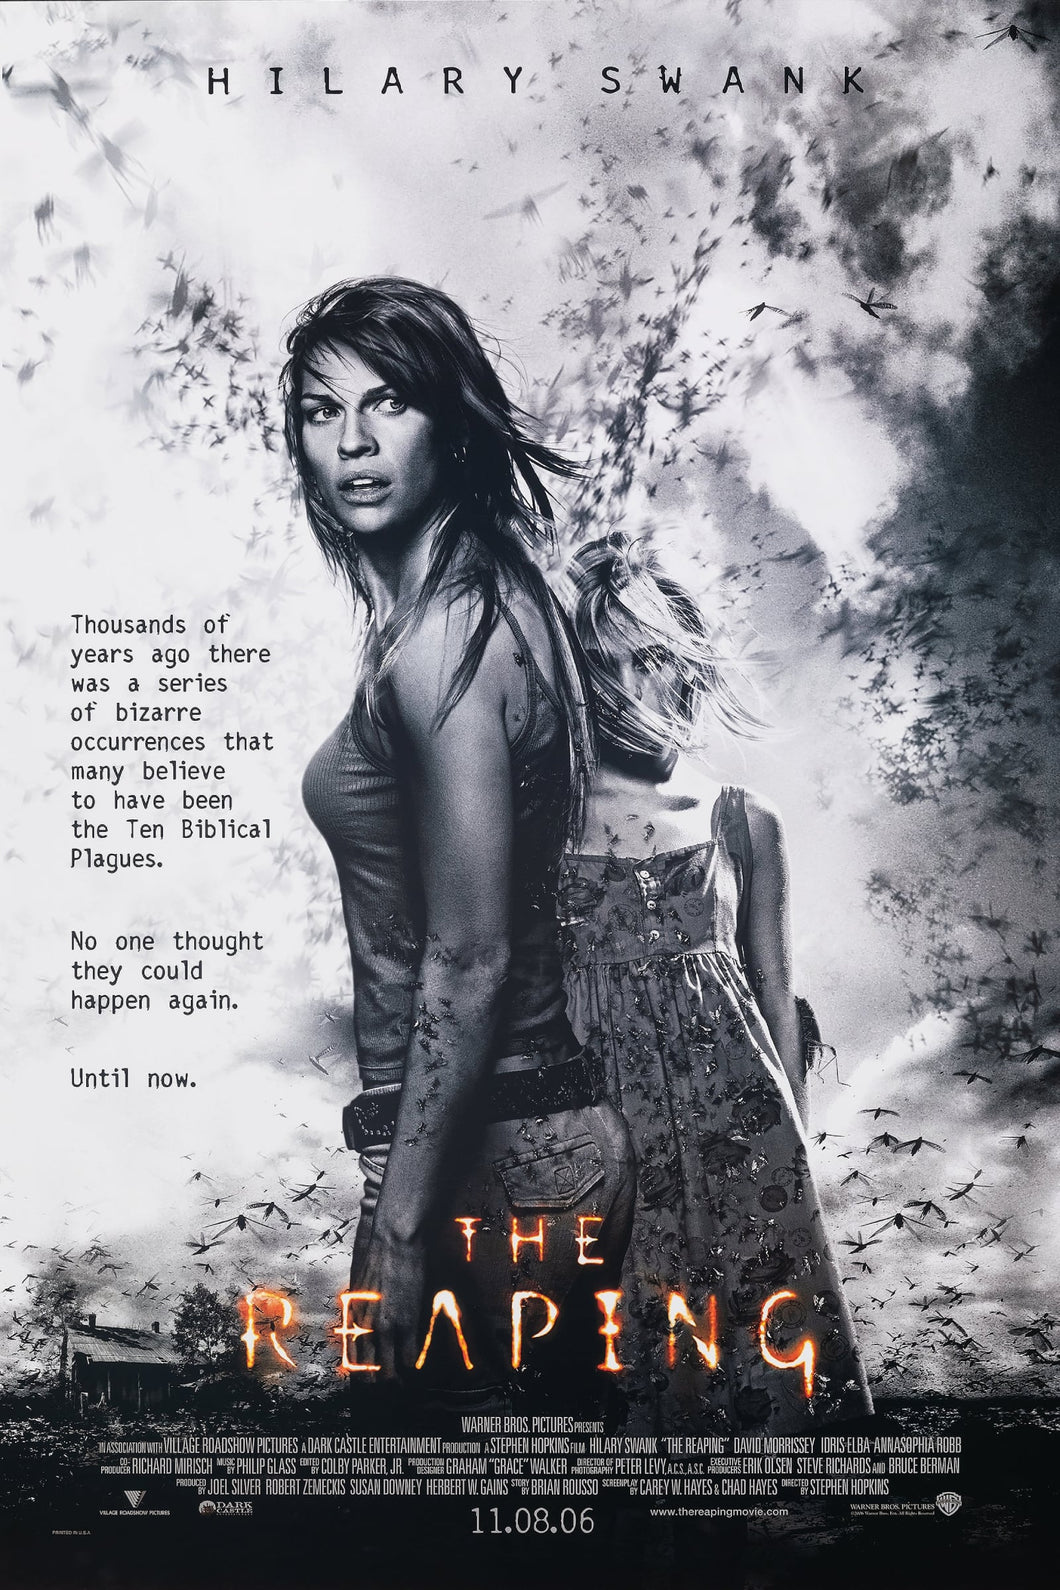 The Reaping (2007) Movie Poster High Quality Glossy Paper A1 A2 A3 A4 A3 Framed or Unframed!!!